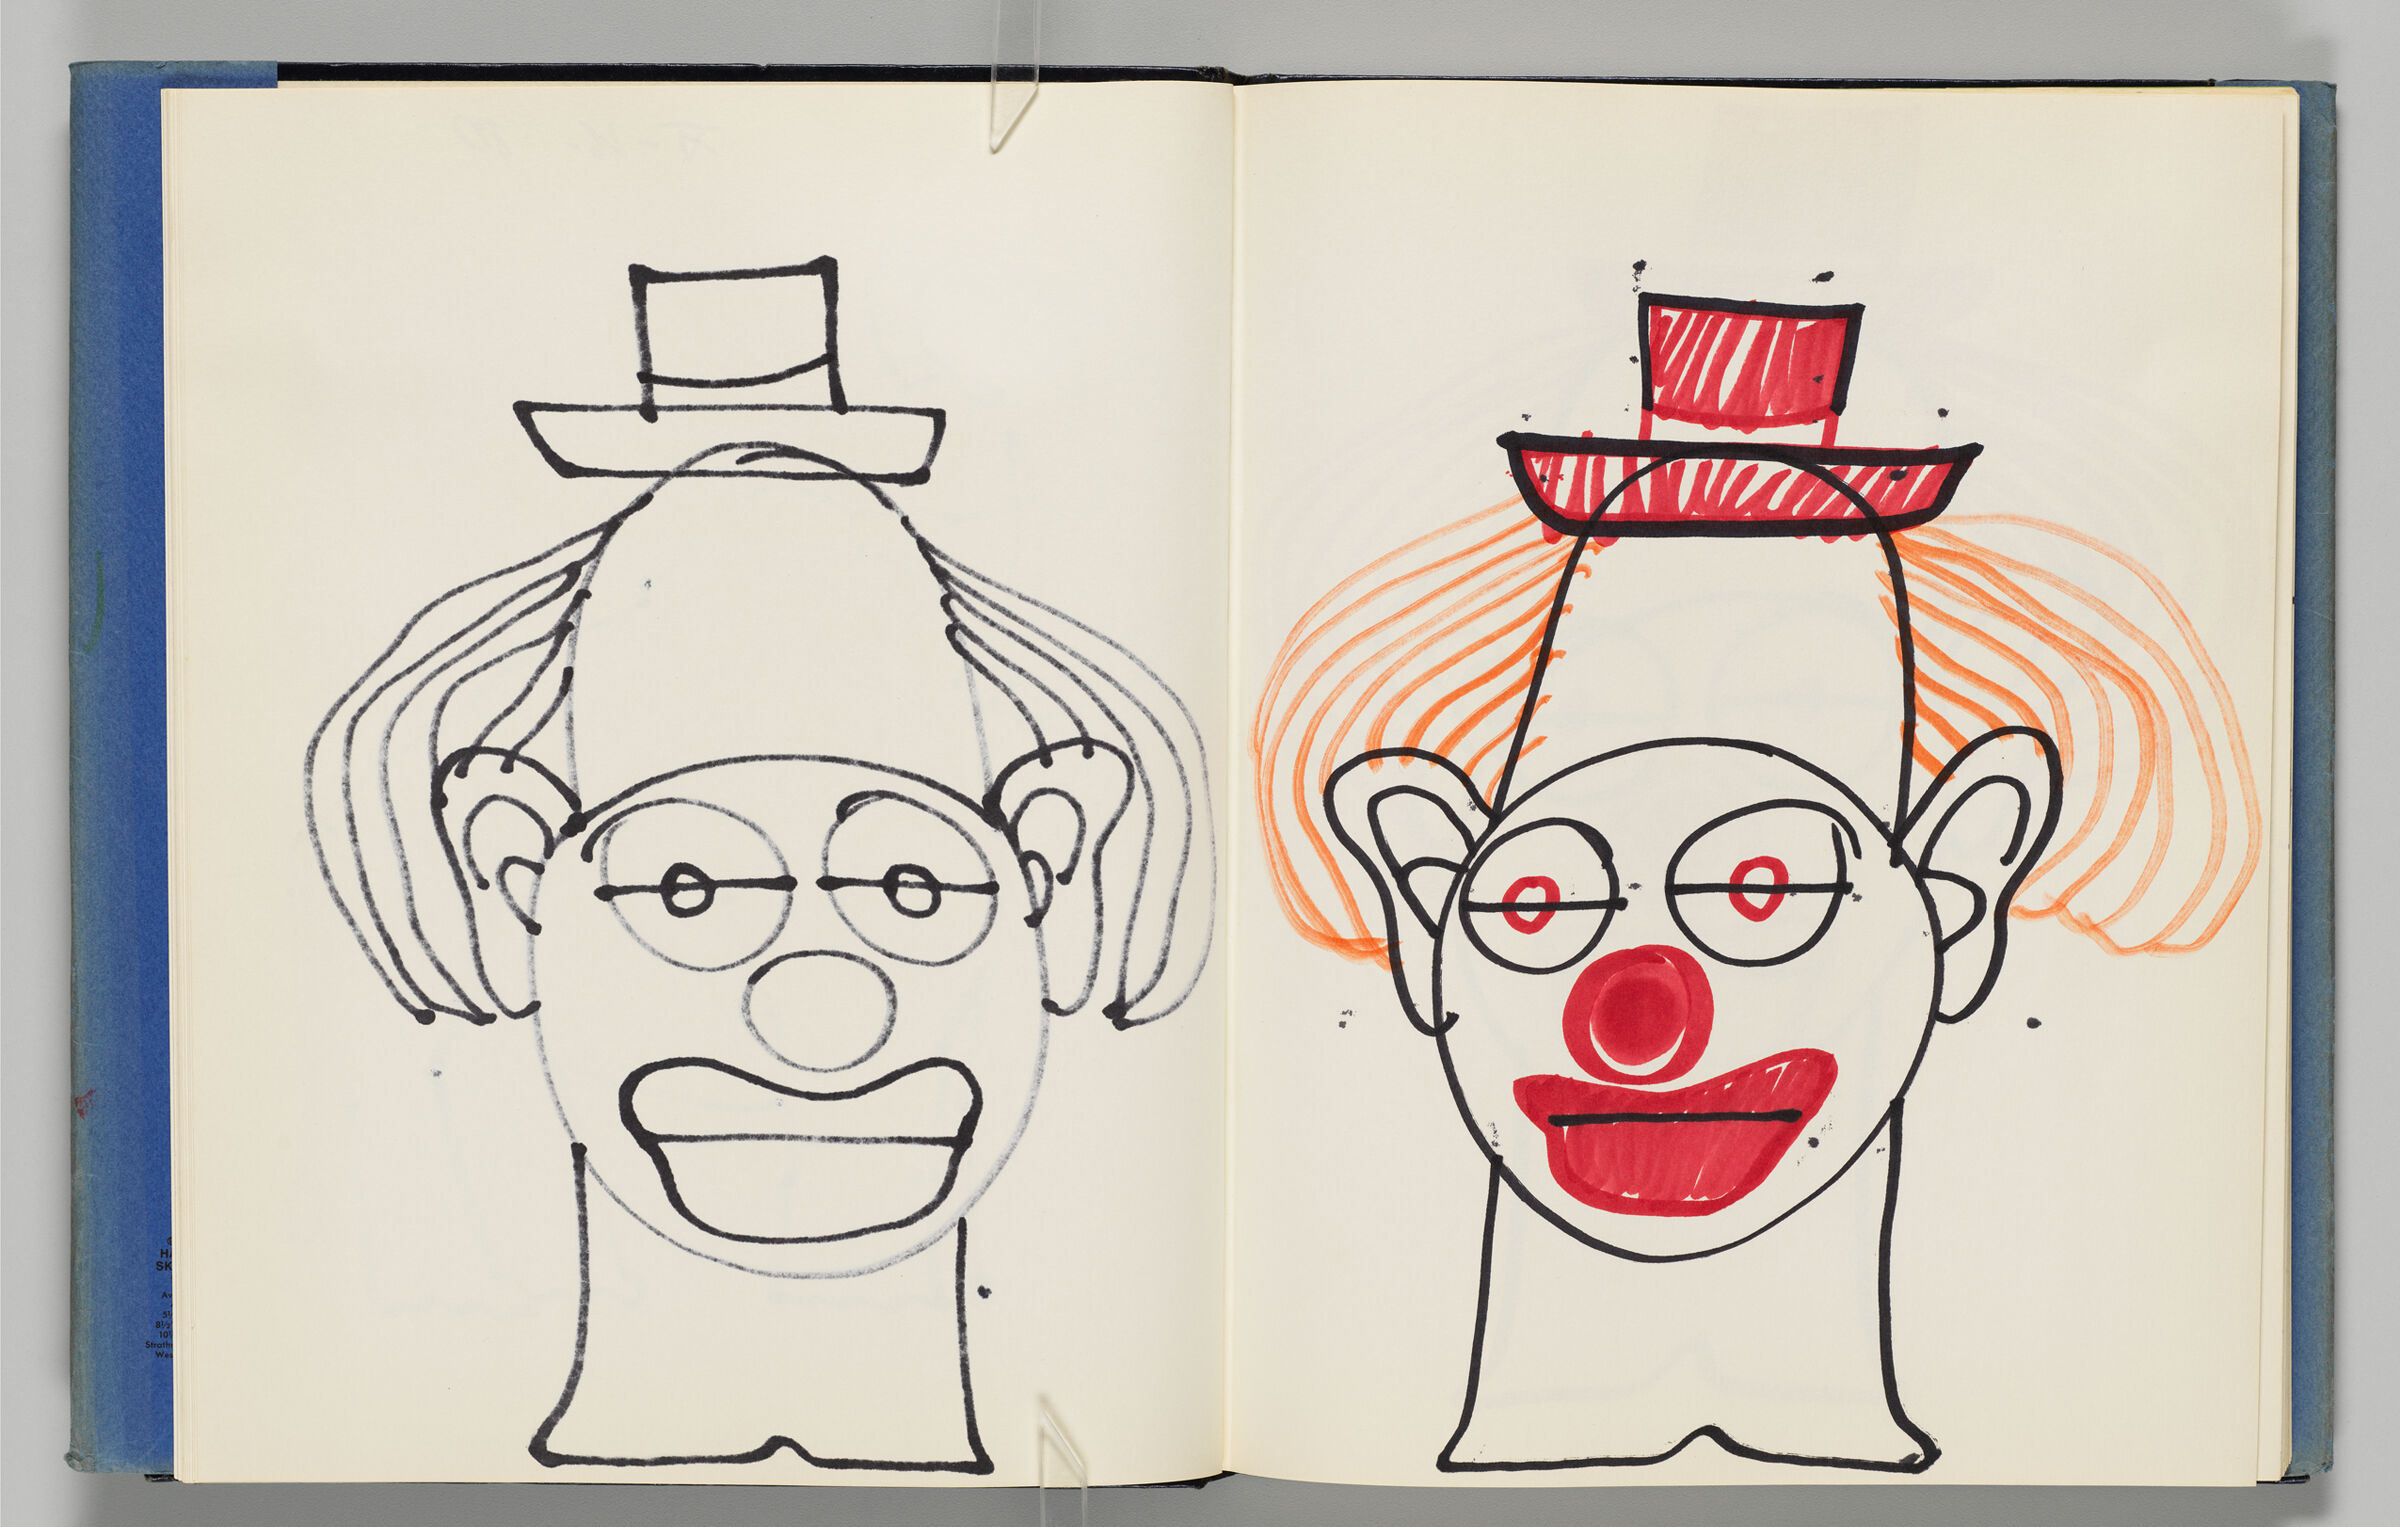 Untitled (Bleed-Through Of Previous Page, Left Page); Untitled (Clown, Right Page)